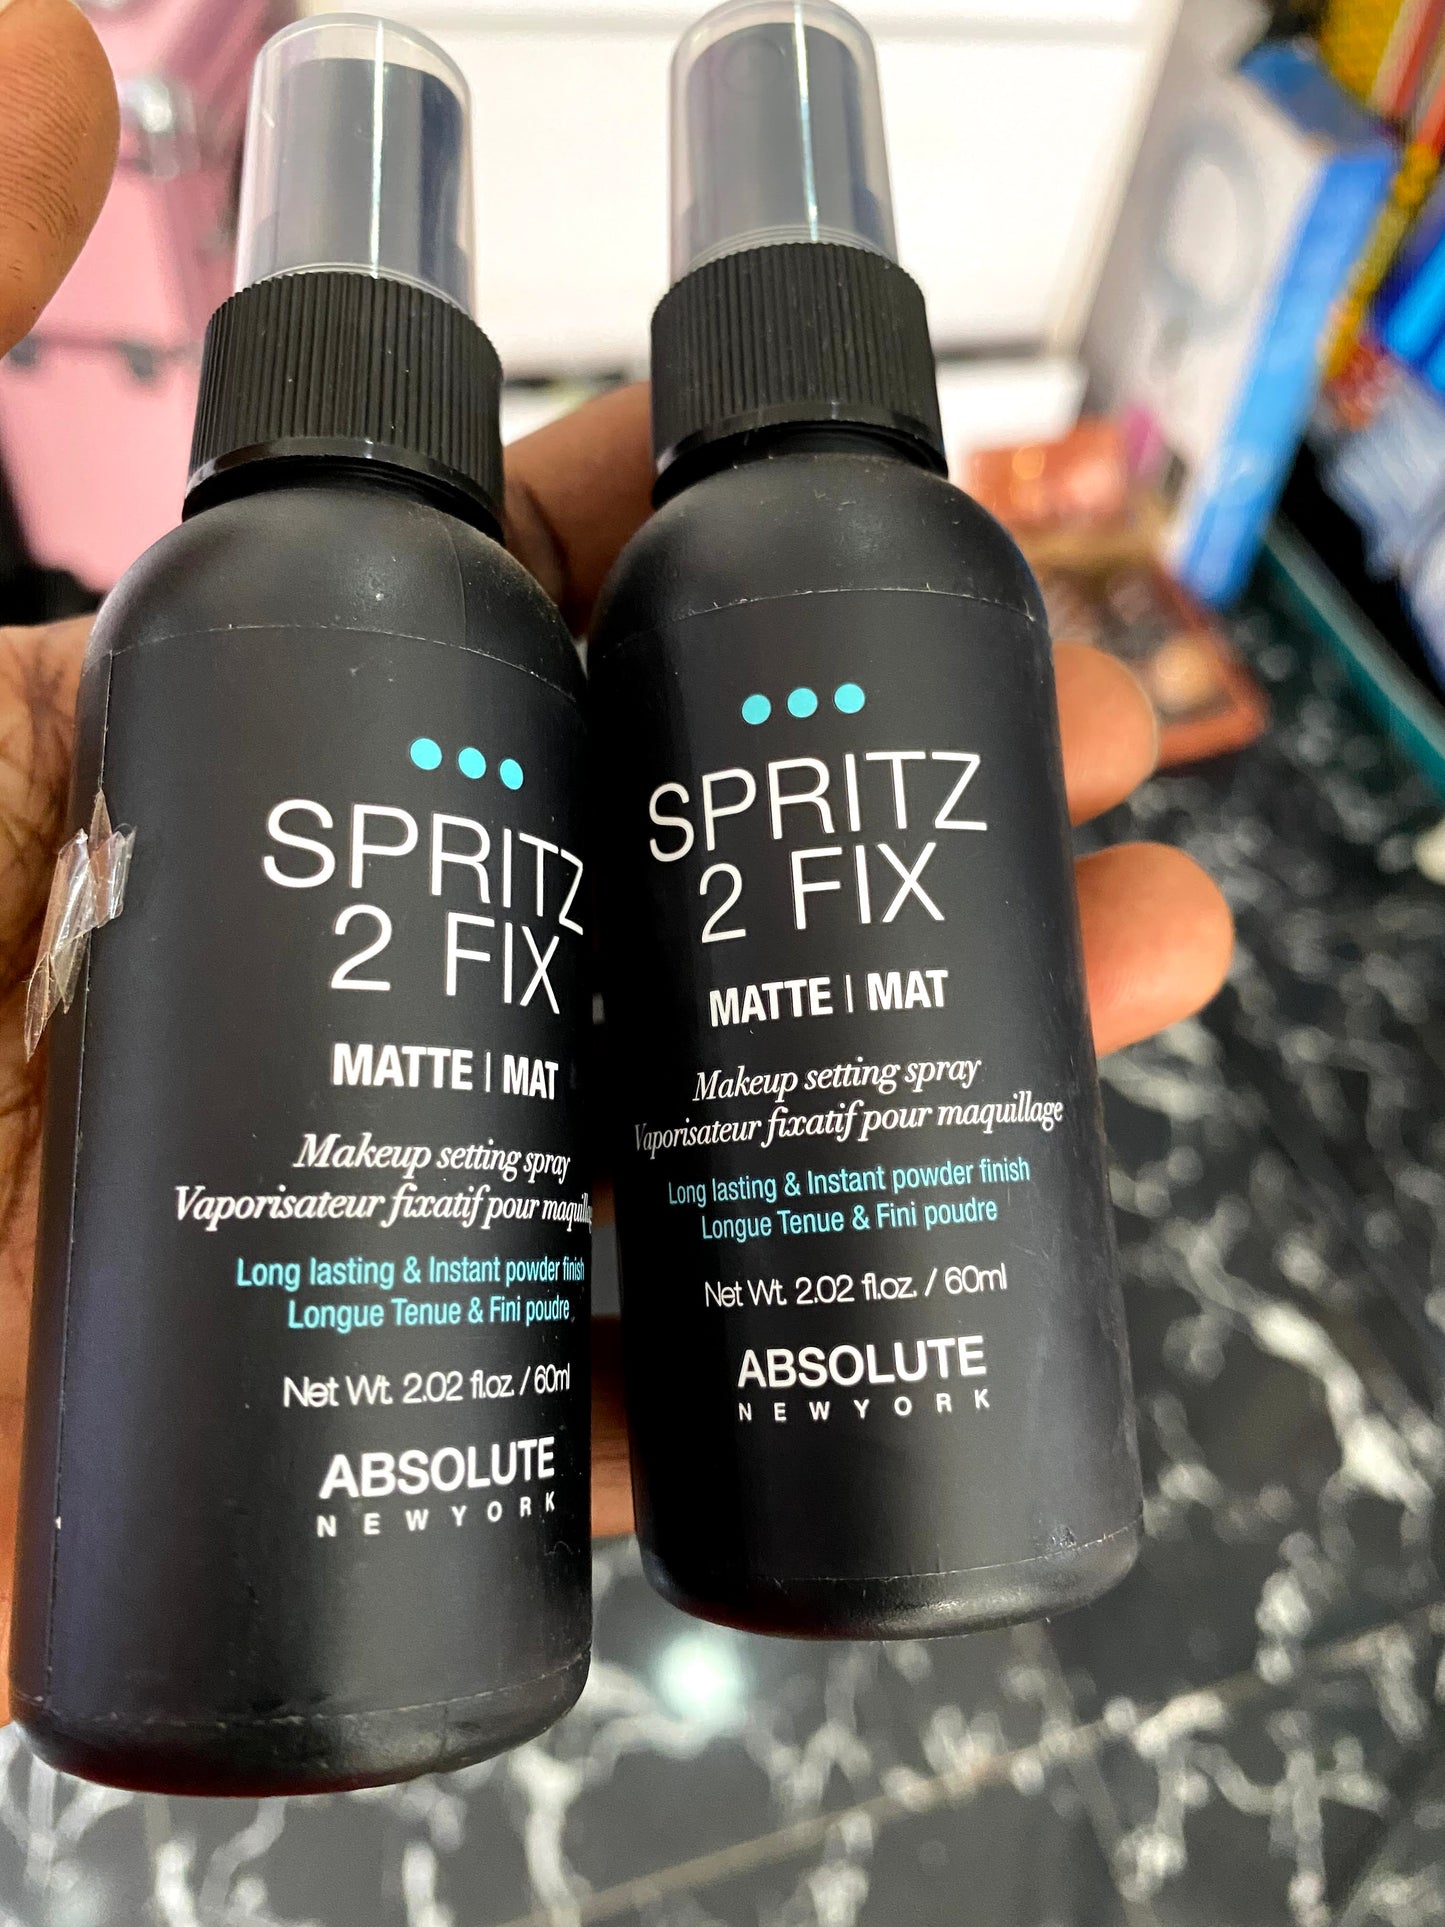 Absolute Spritz to Fix Makeup Setting Spray